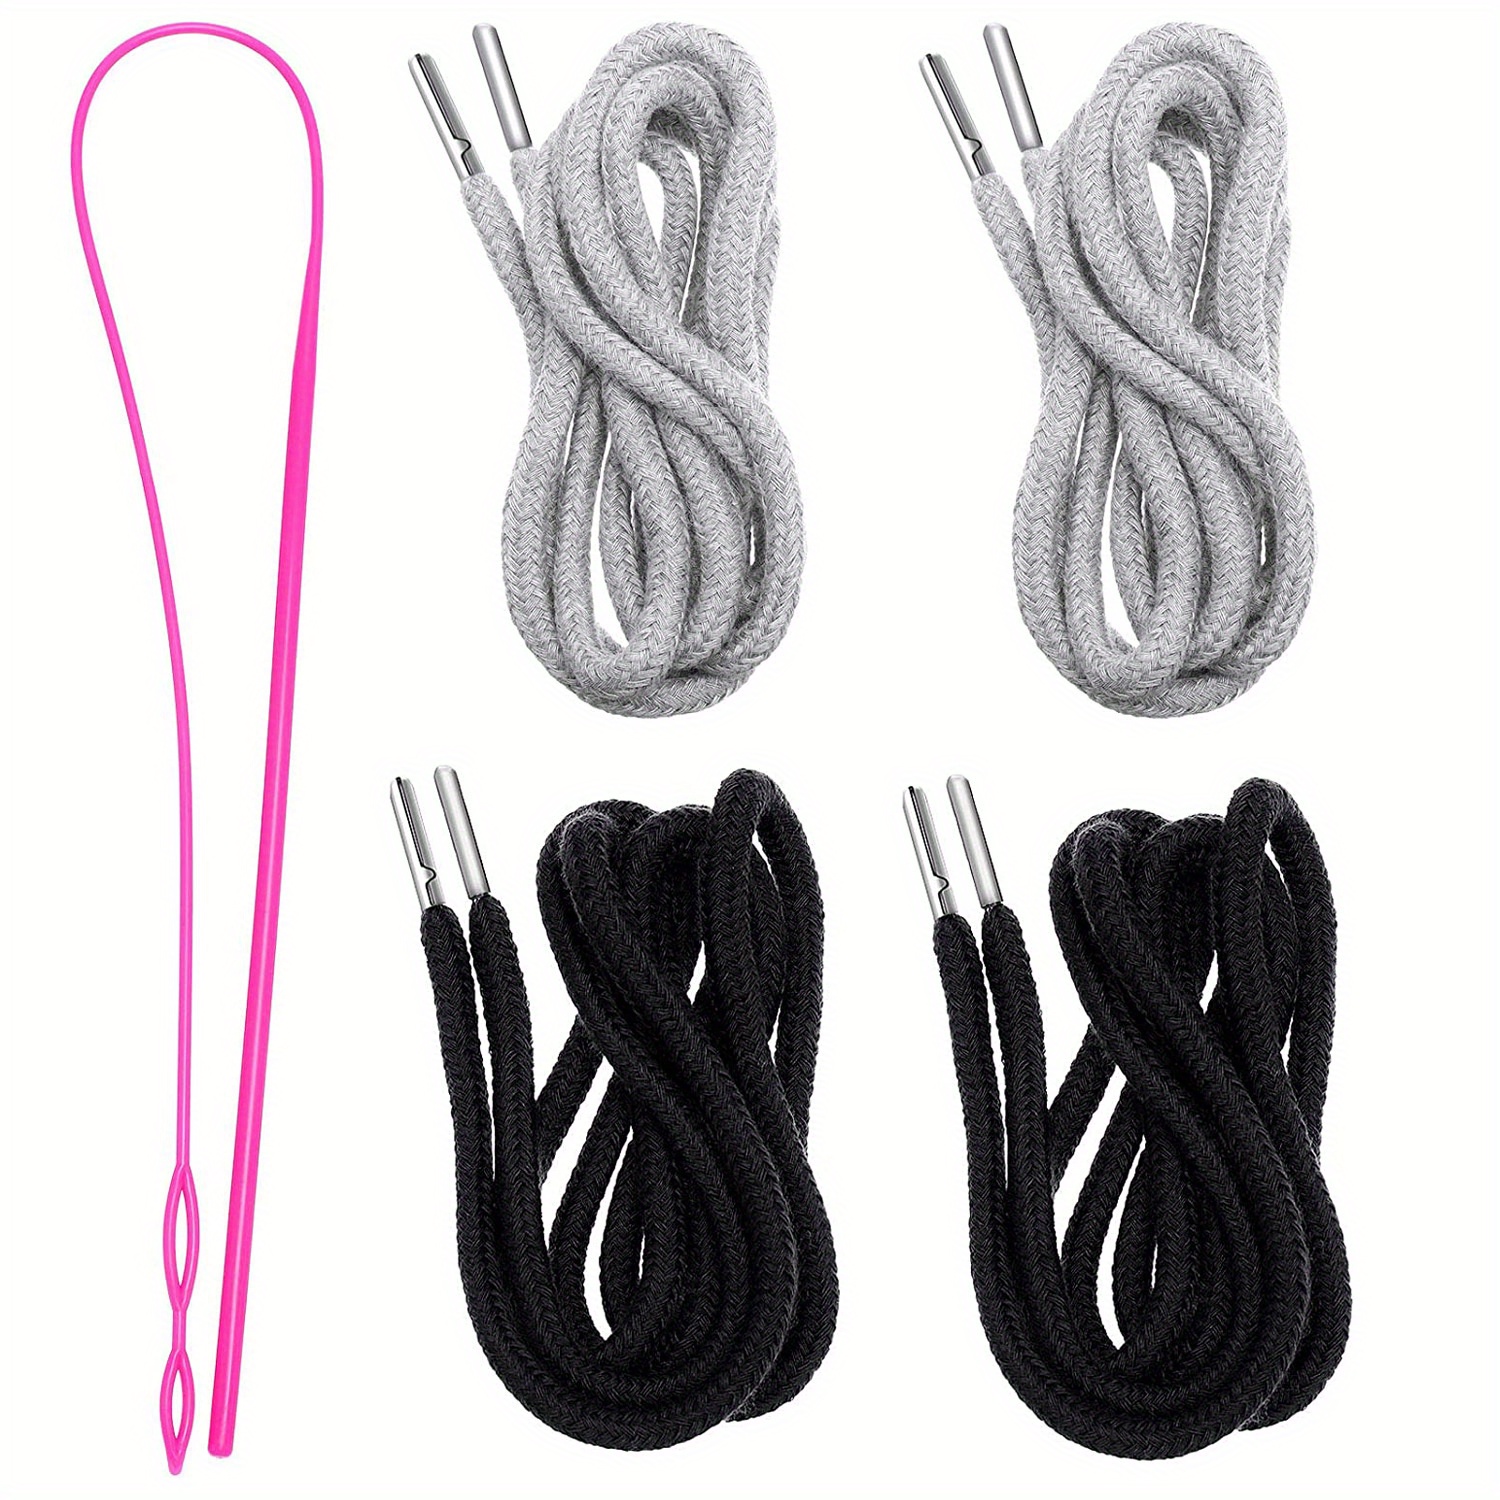 Drawstring Cords for Sewing Draw String Replacer Hoodie Drawstring  Replacement(4 Round + 4 Flat + 2 Drawstring Threader + 1 Seam Ripper + 4  Plastic Cord Locks) 